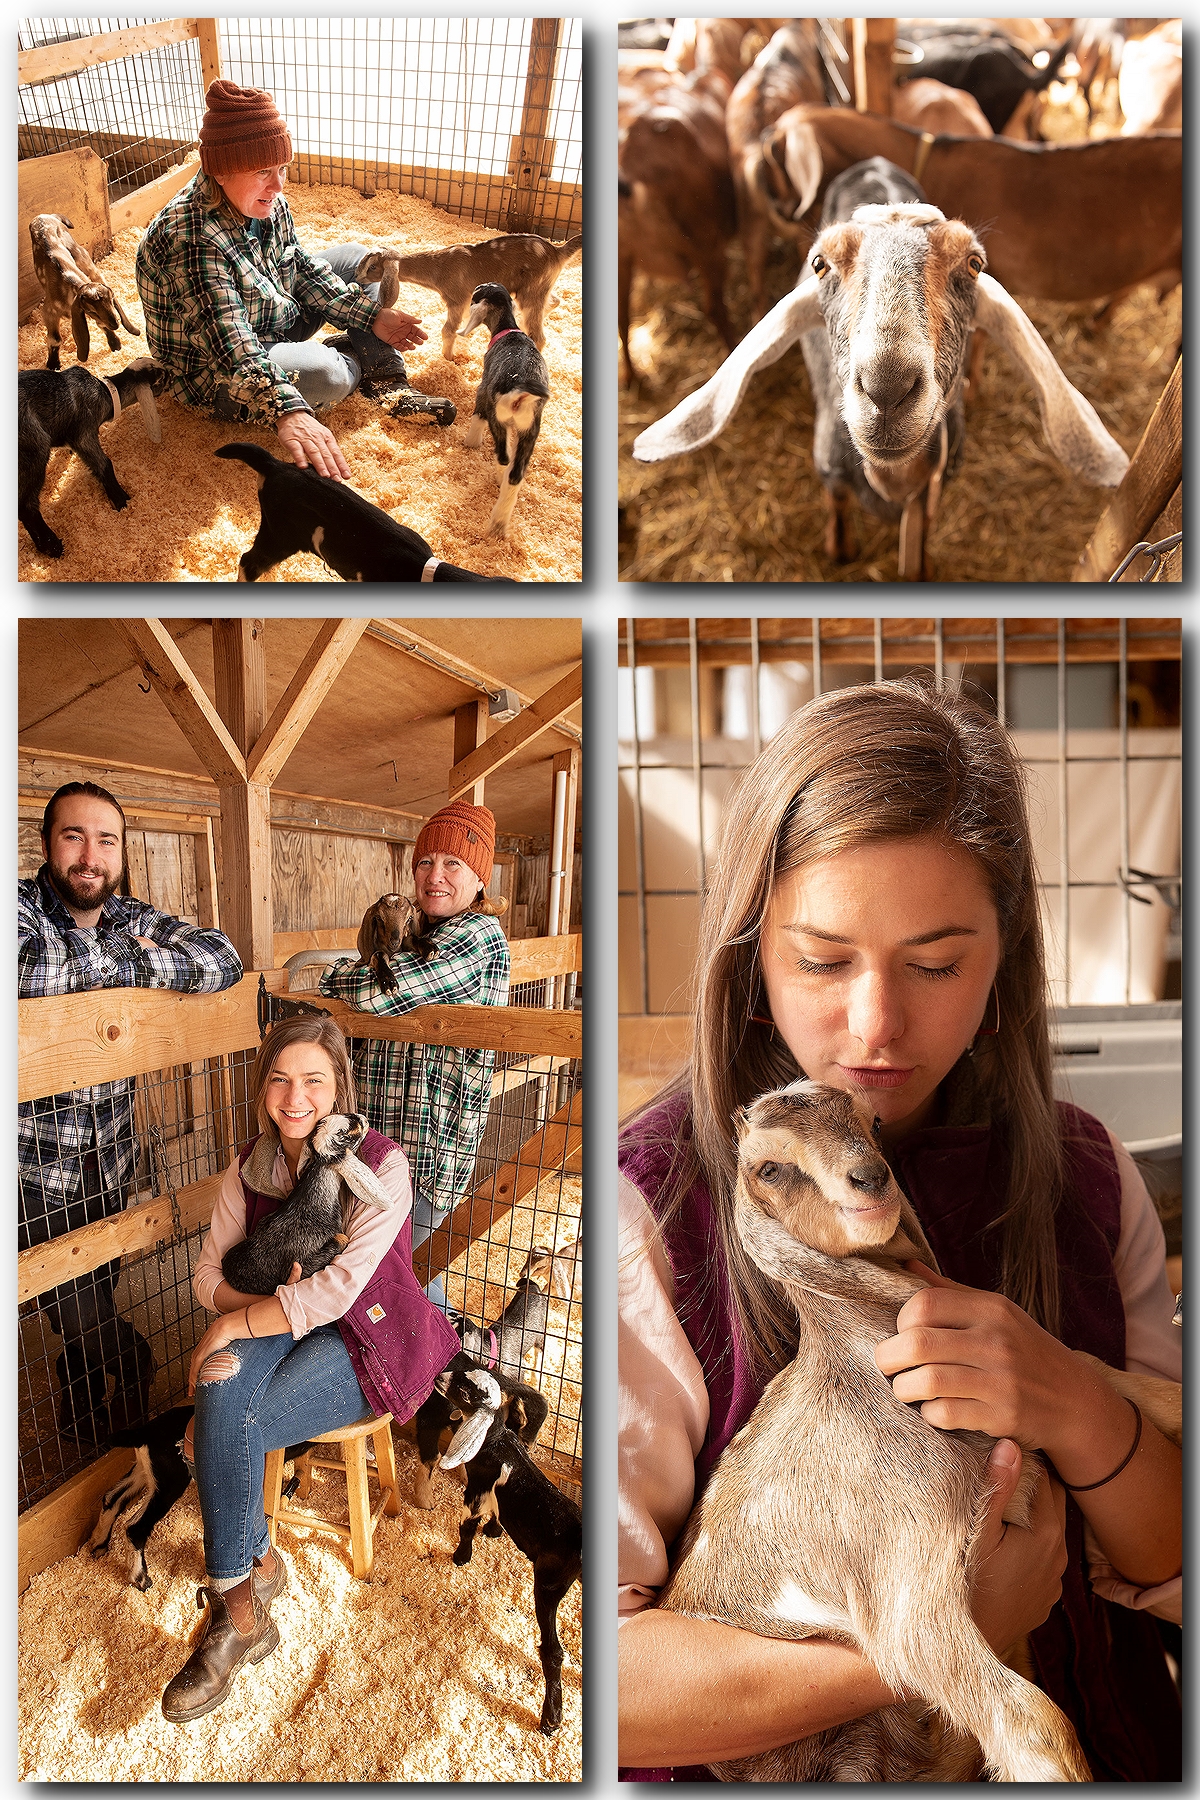 Good Goats Cover View With Merrimack Valley Magazine